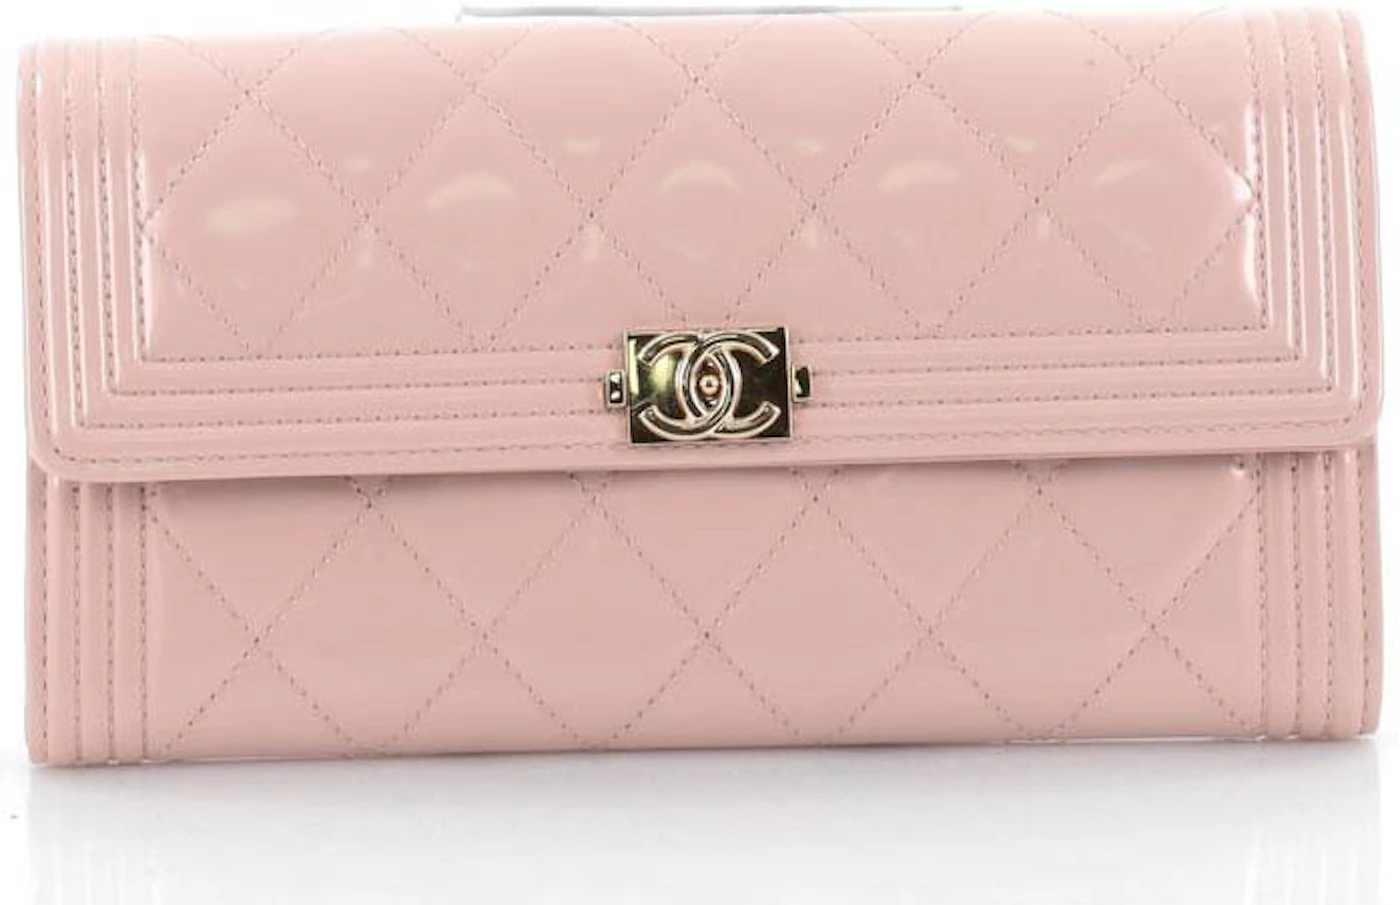 CHANEL Velvet Quilted Small Boy Flap Pink 1275044